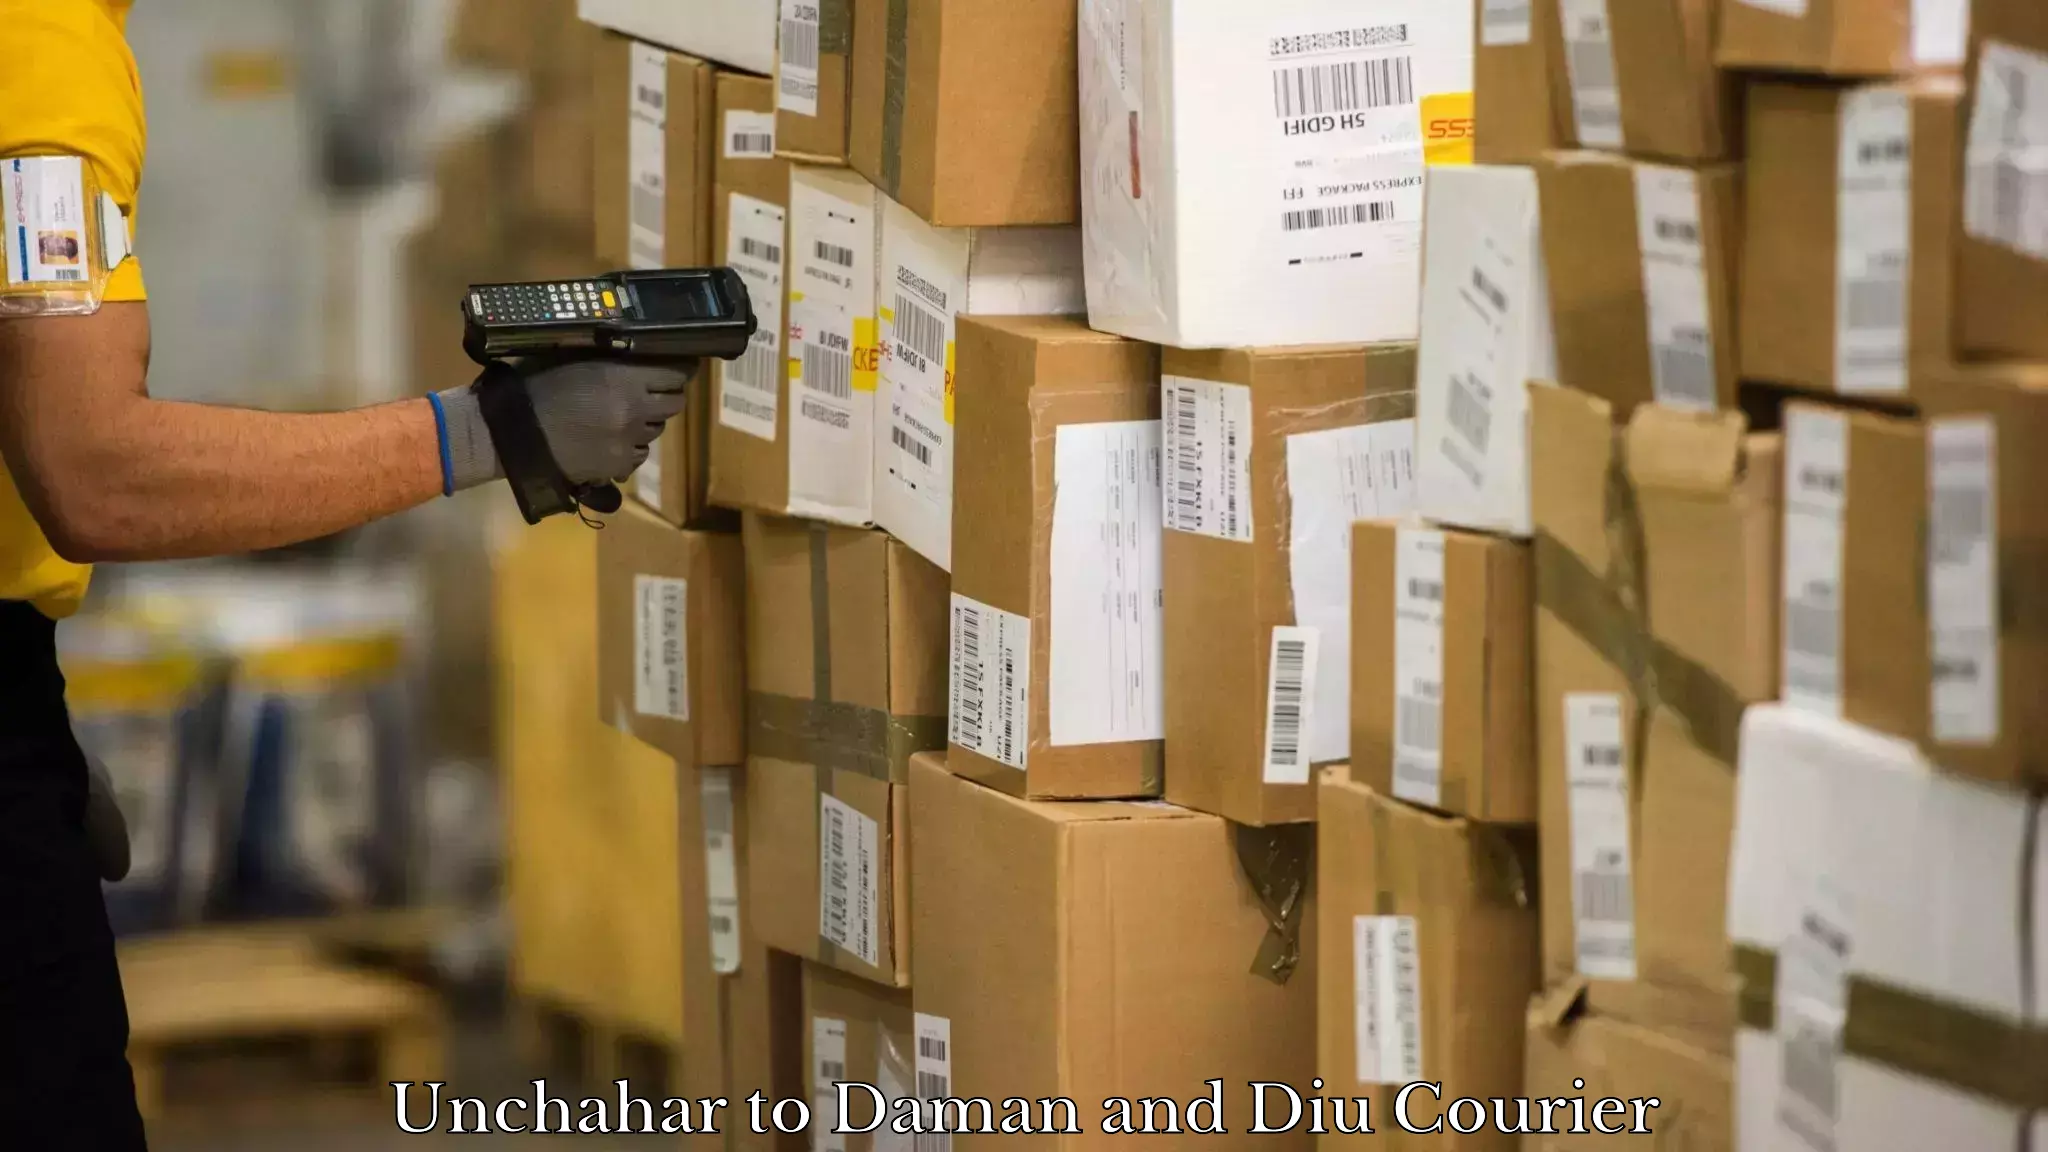 Nationwide shipping services Unchahar to Daman and Diu